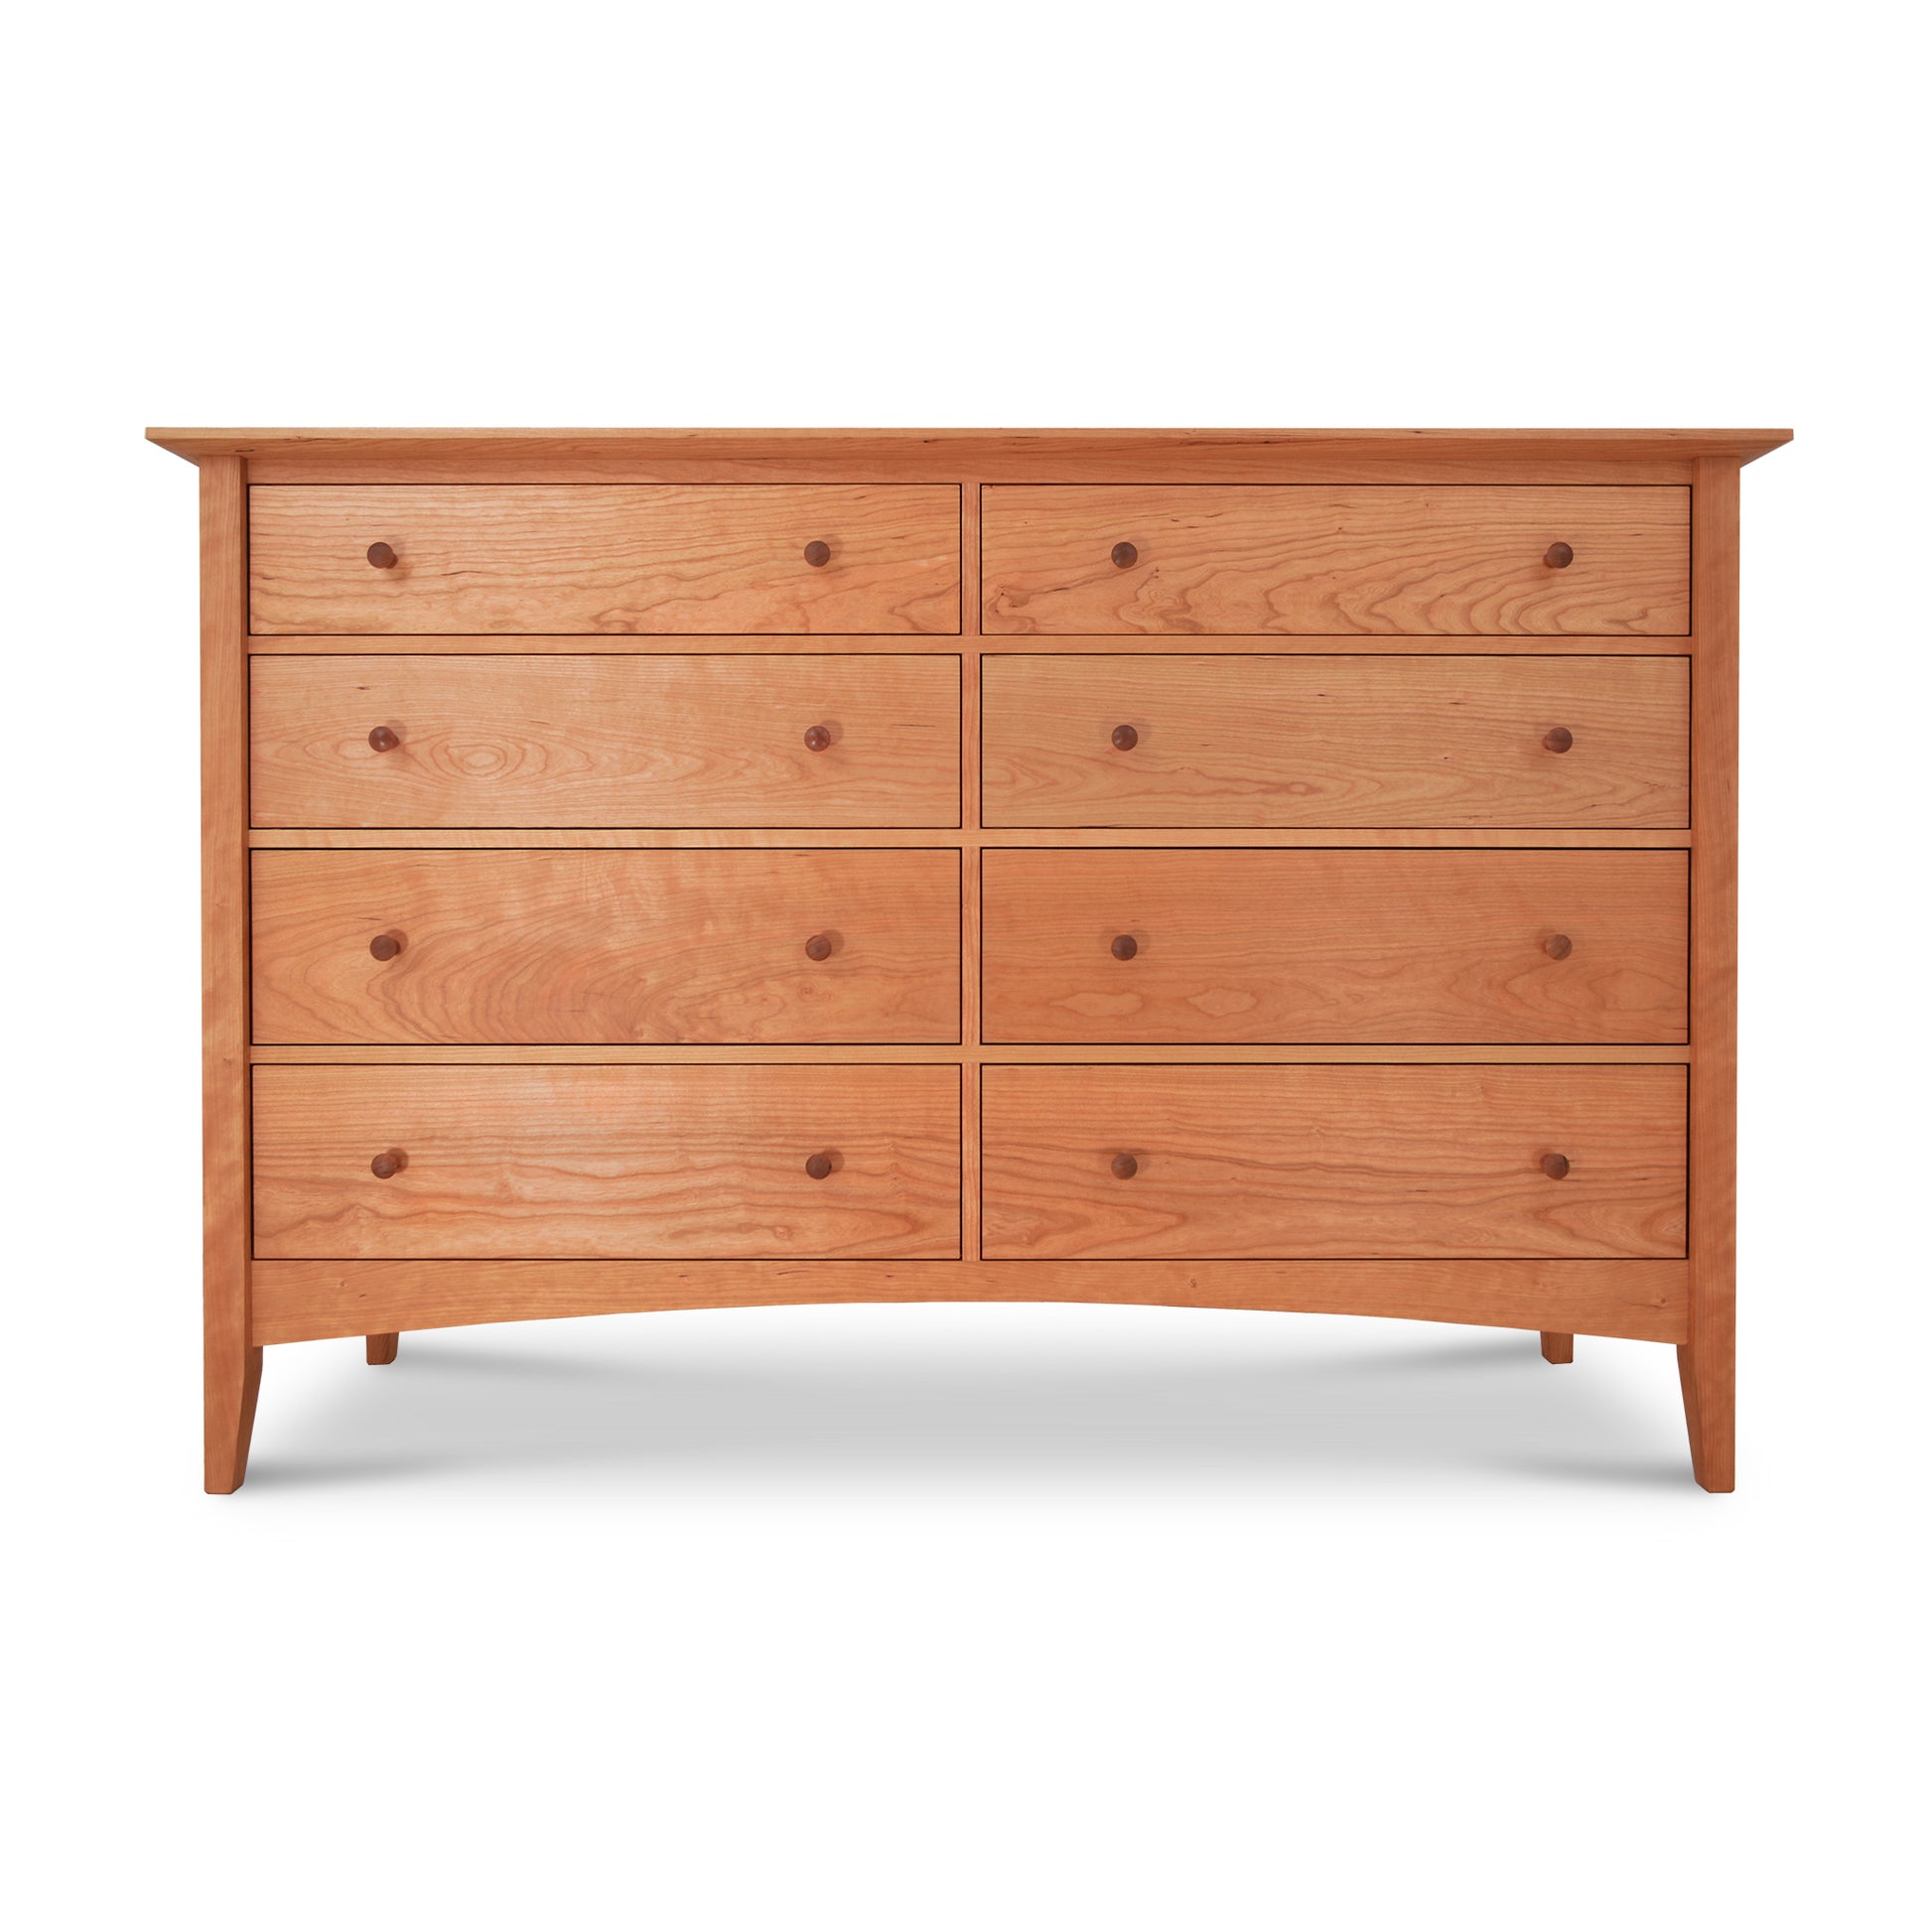 Â The Maple Corner Woodworks American Shaker 8-Drawer Dresser with round knobs, set against a plain white background. This solid wood dresser has a simple, traditional design with a natural wood finish.